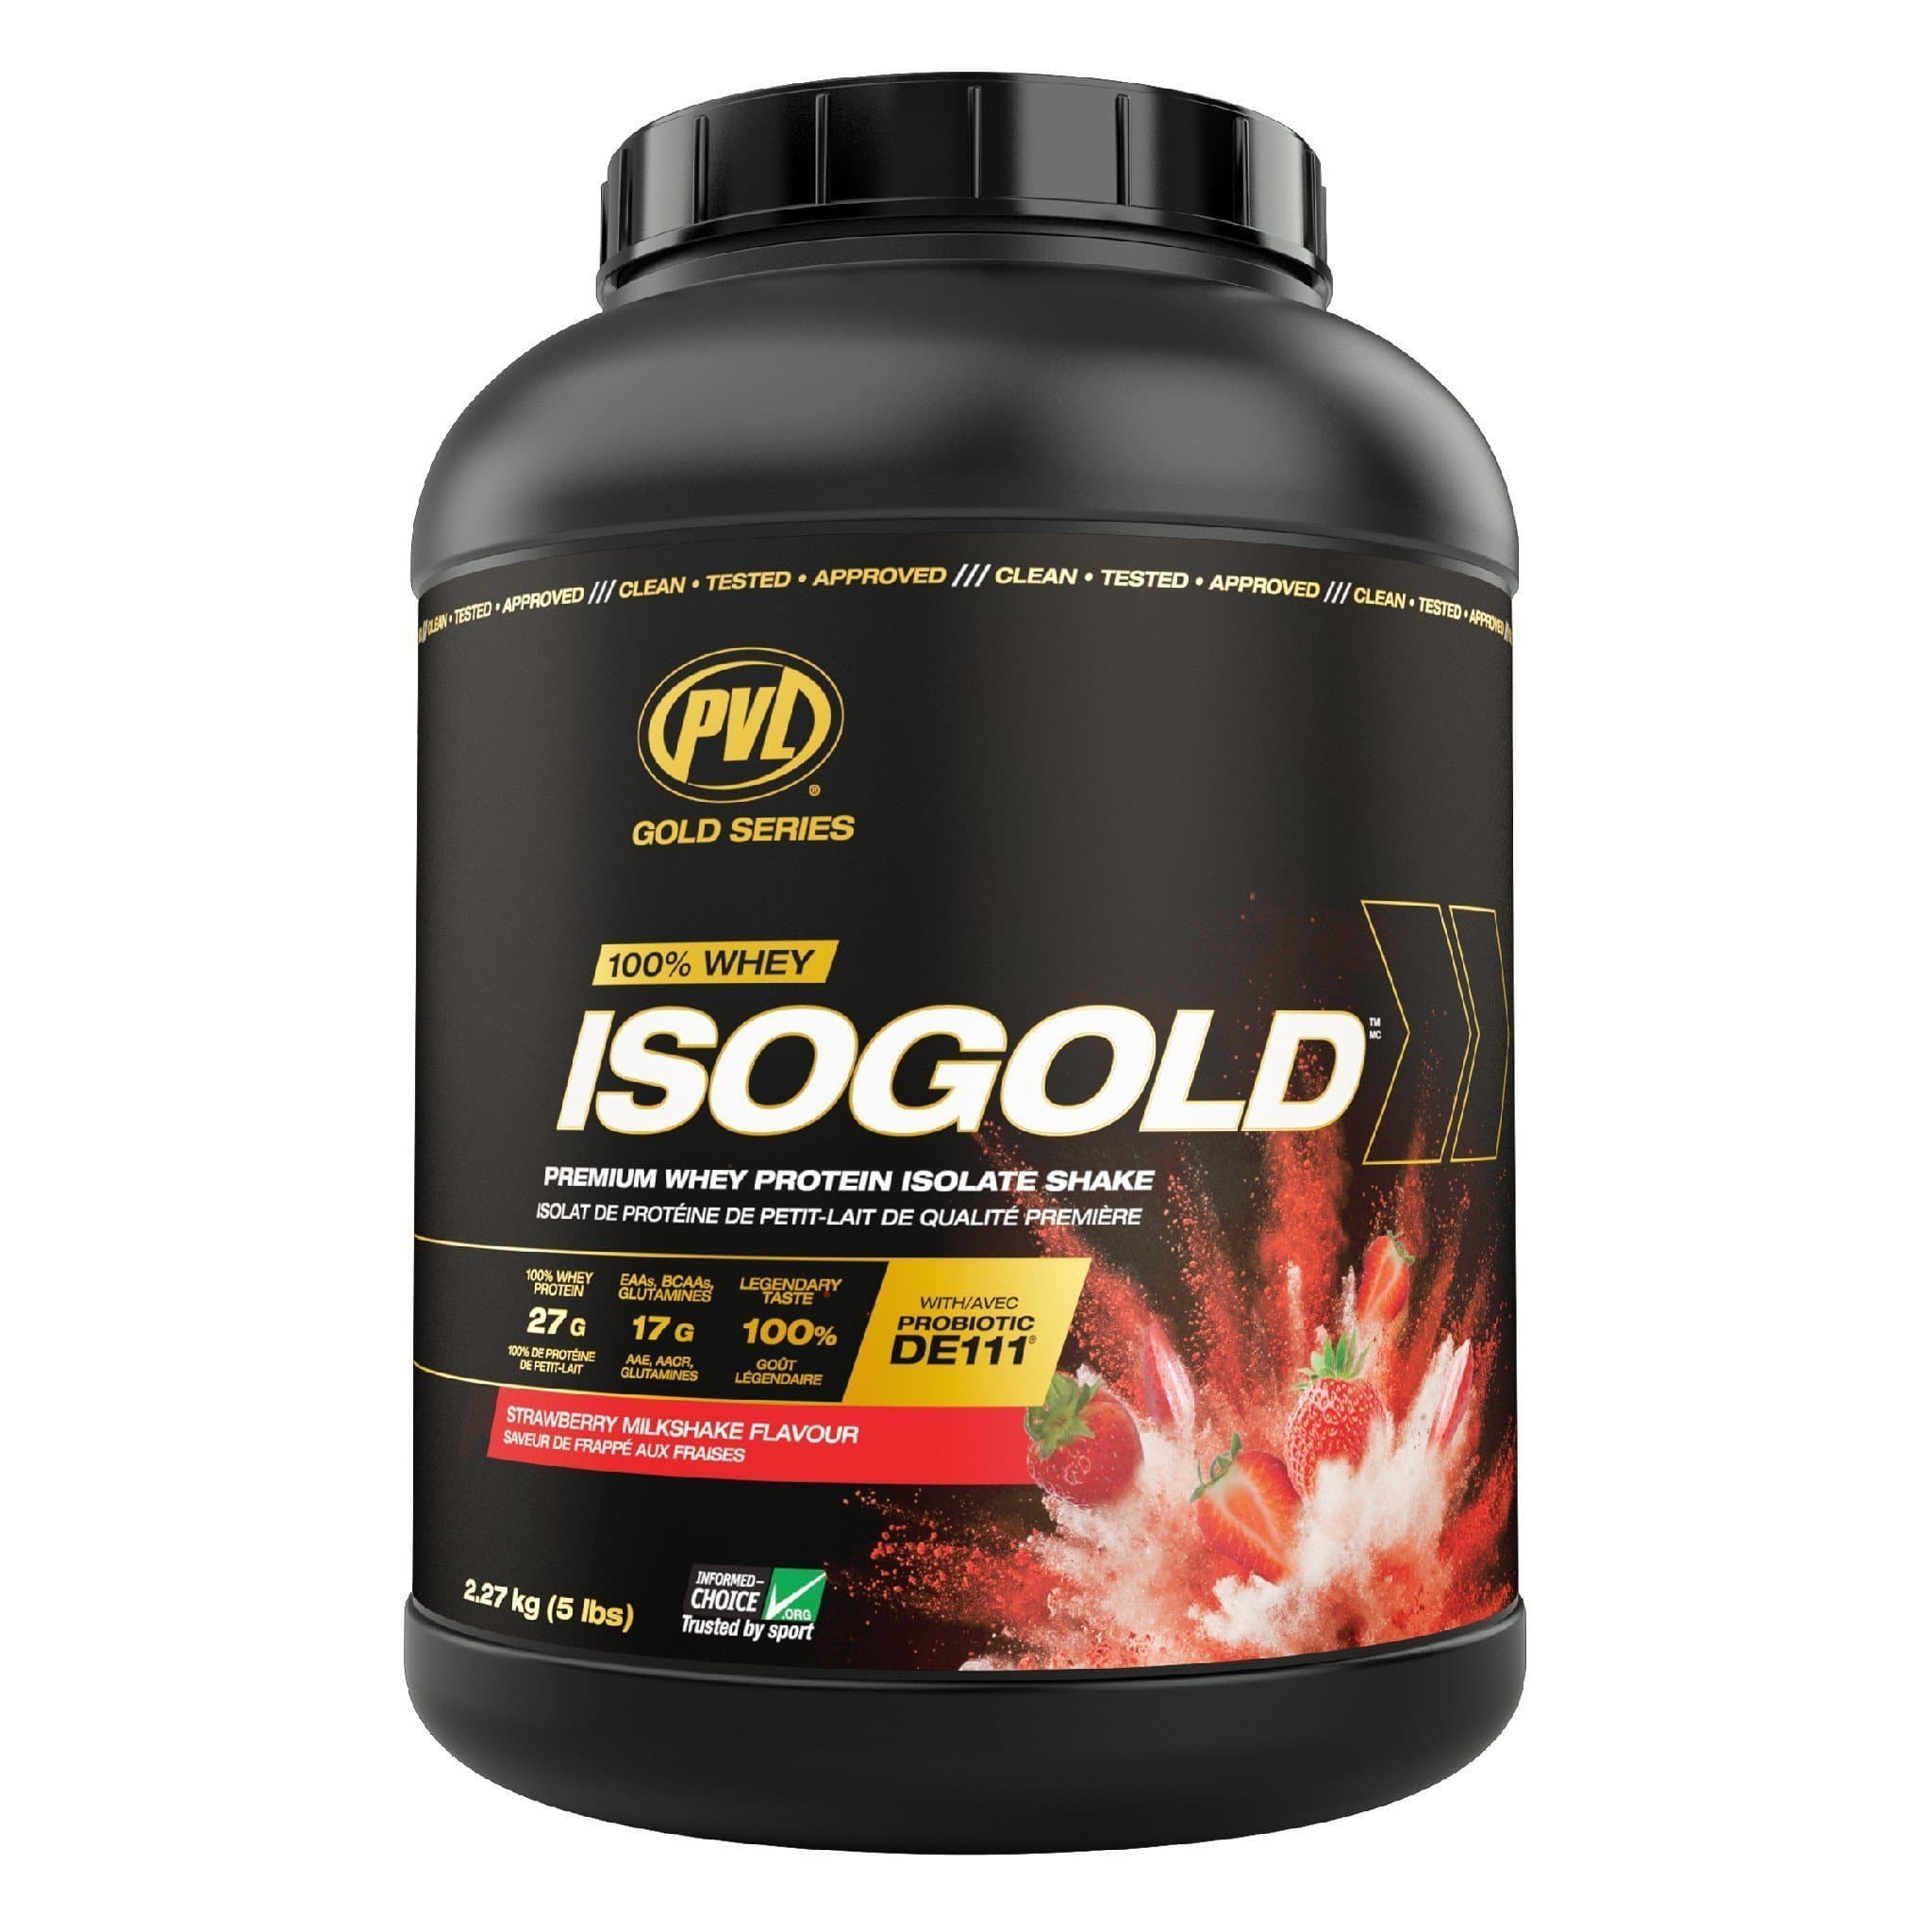 PVL Isogold 5lb | HERC'S Nutrition Canada